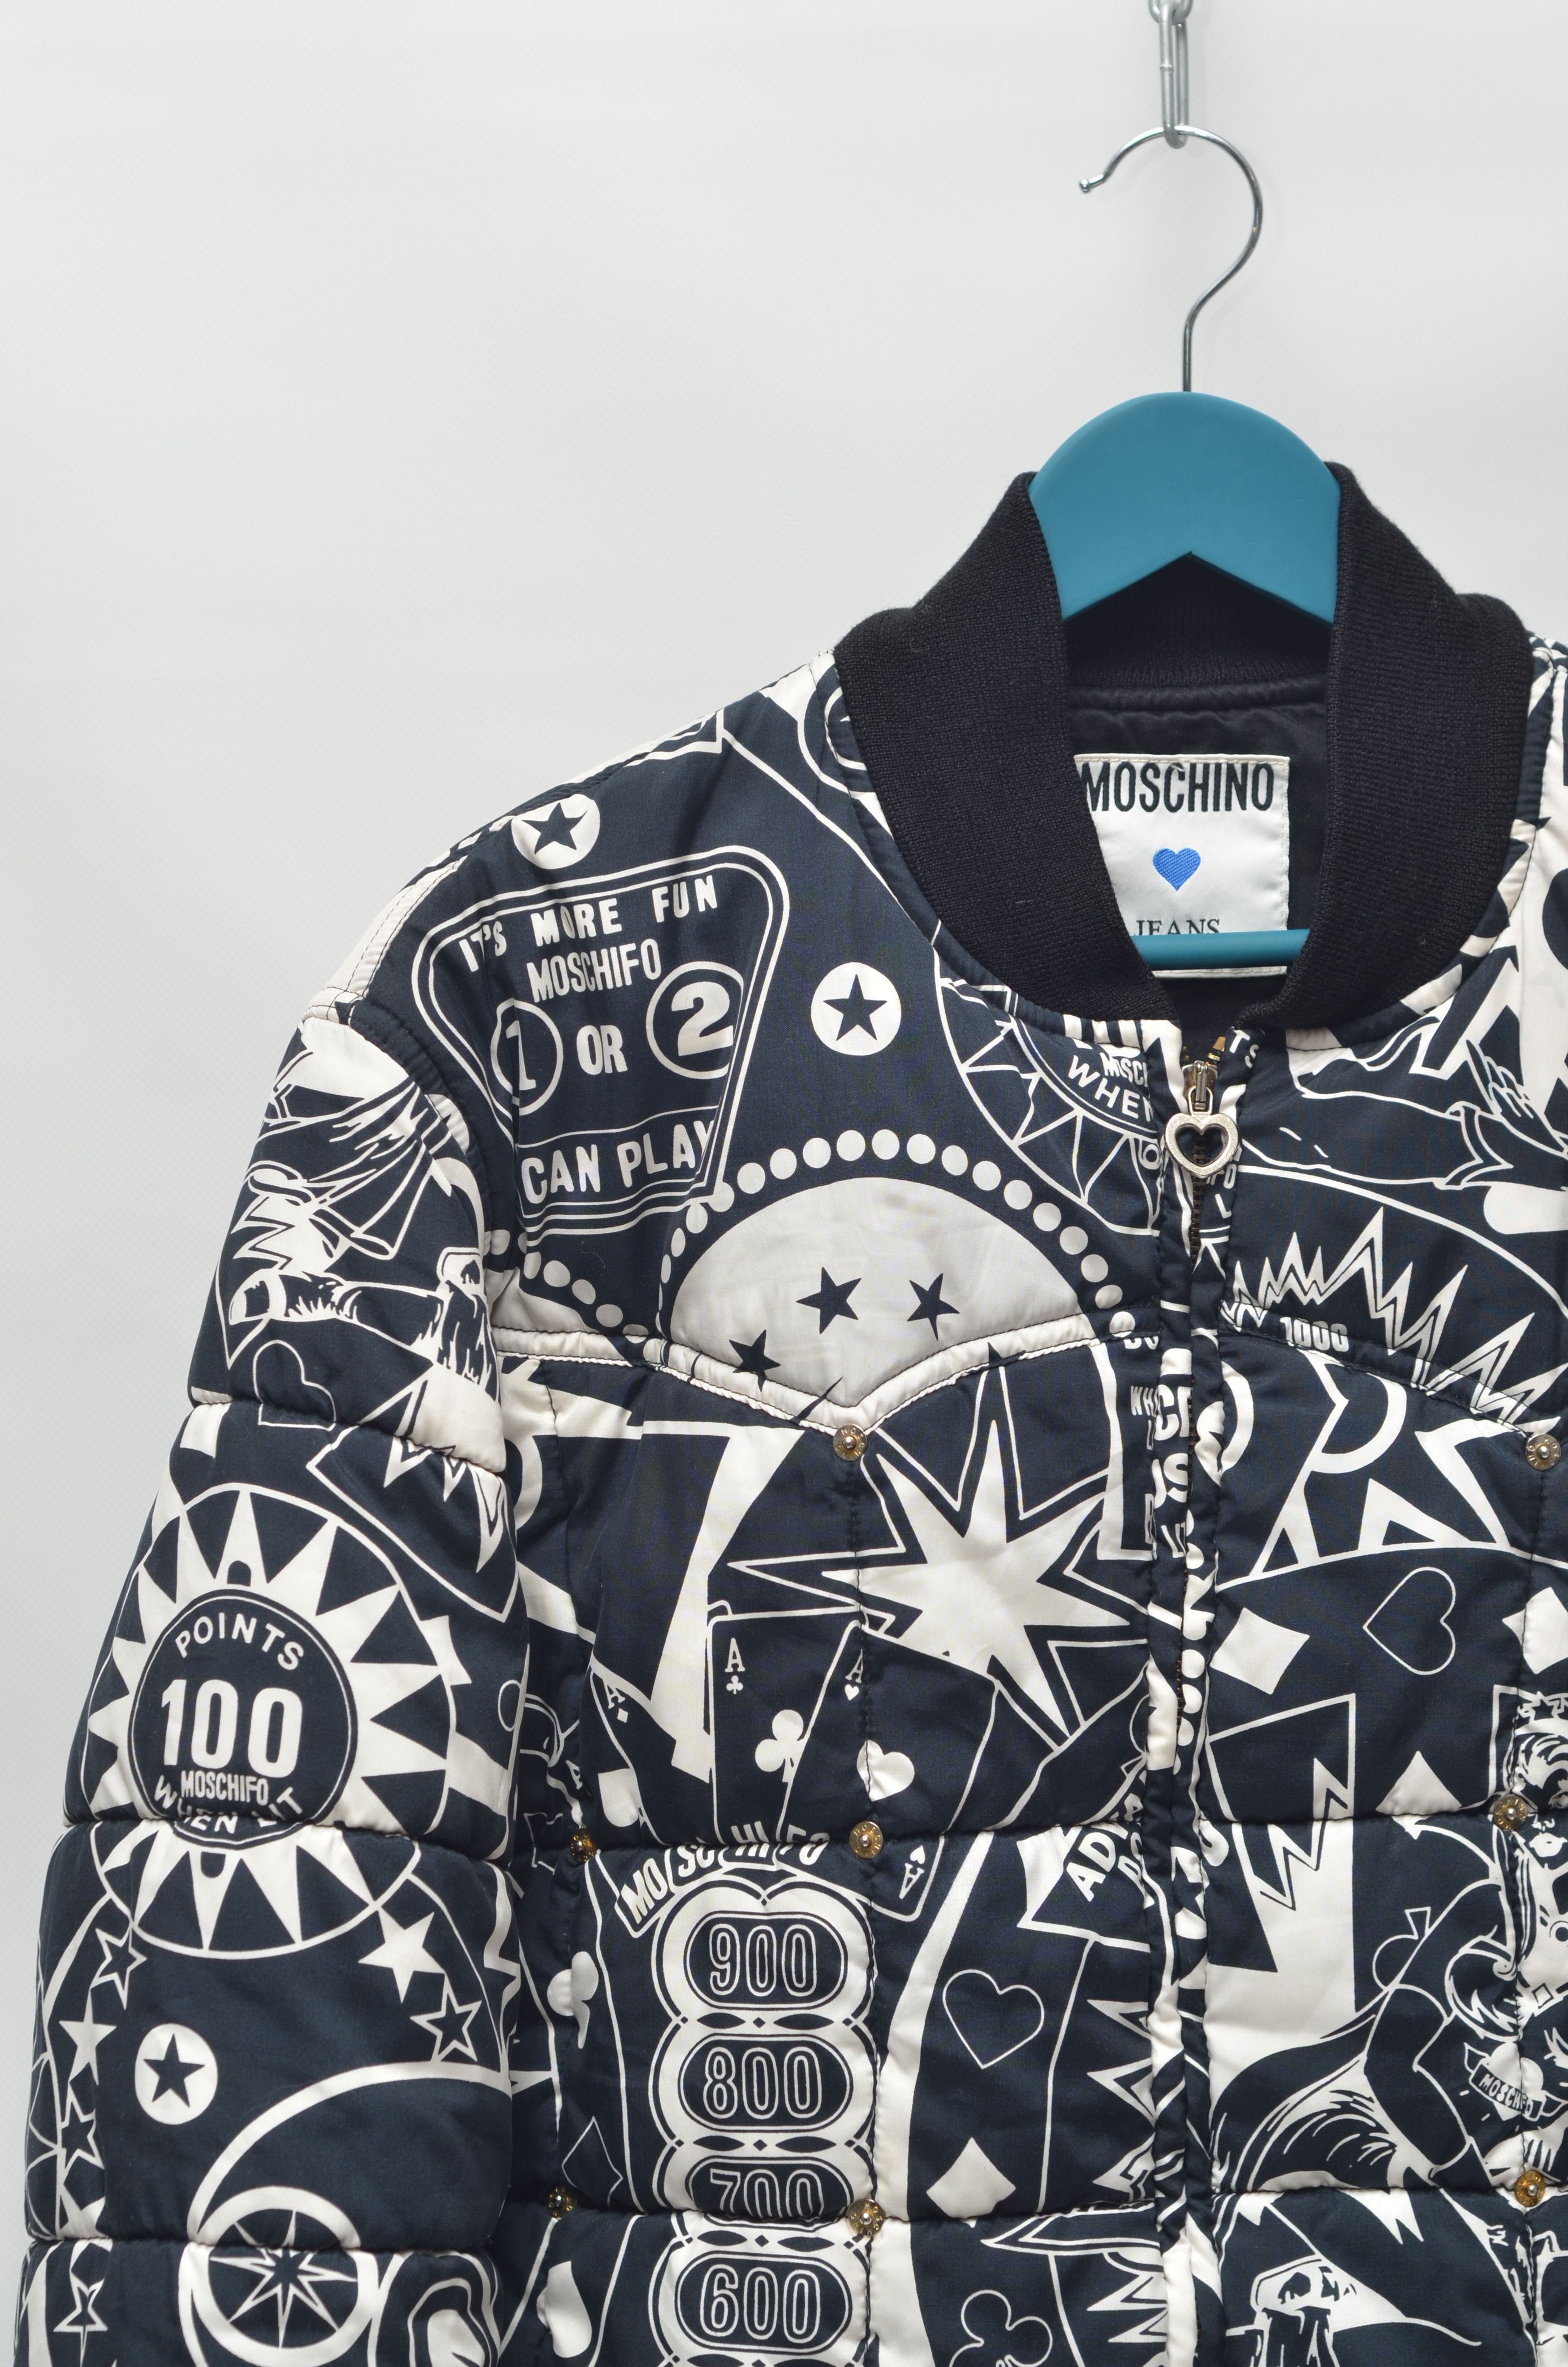 Moschino MOSCHINO Vintage Rare Pinball Bomber Jacket Made in Italy Size US M / EU 48-50 / 2 - 2 Preview